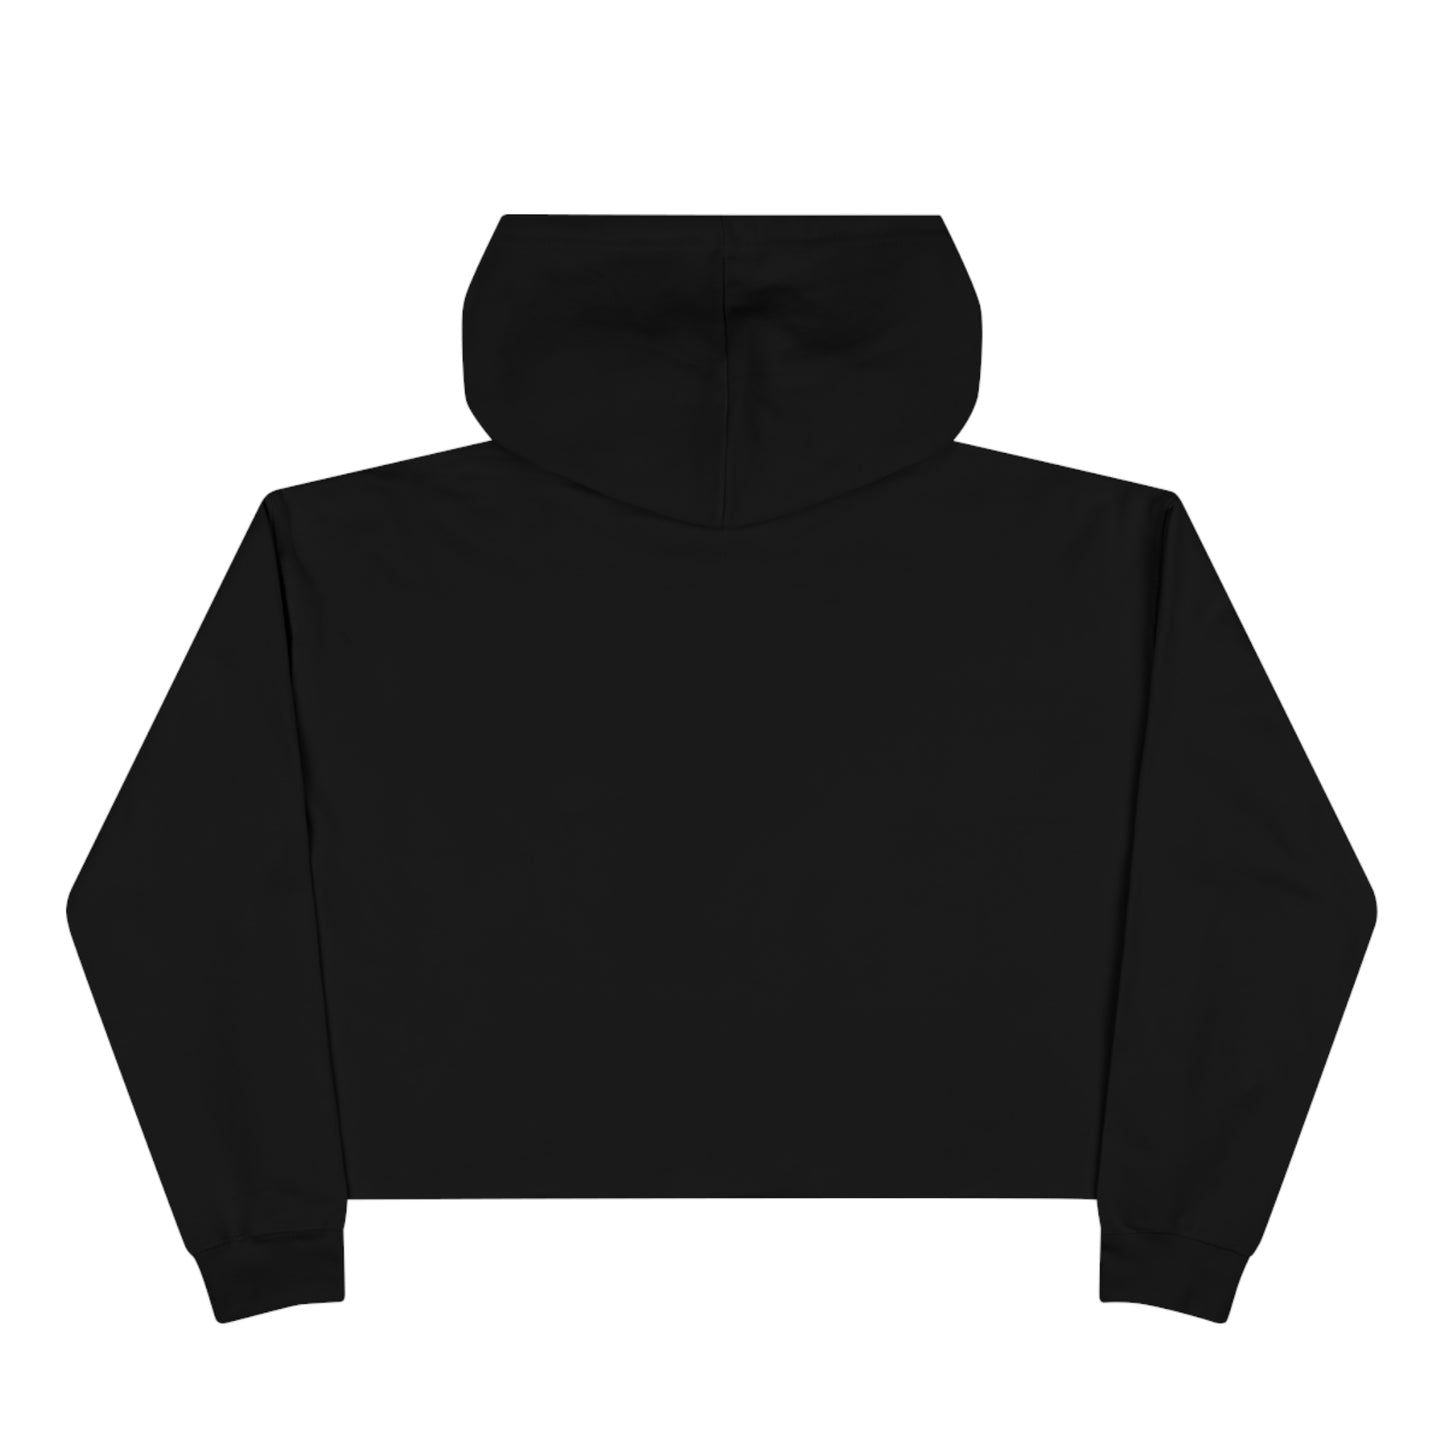 Deadly Vibes Space Cropped Hoodie